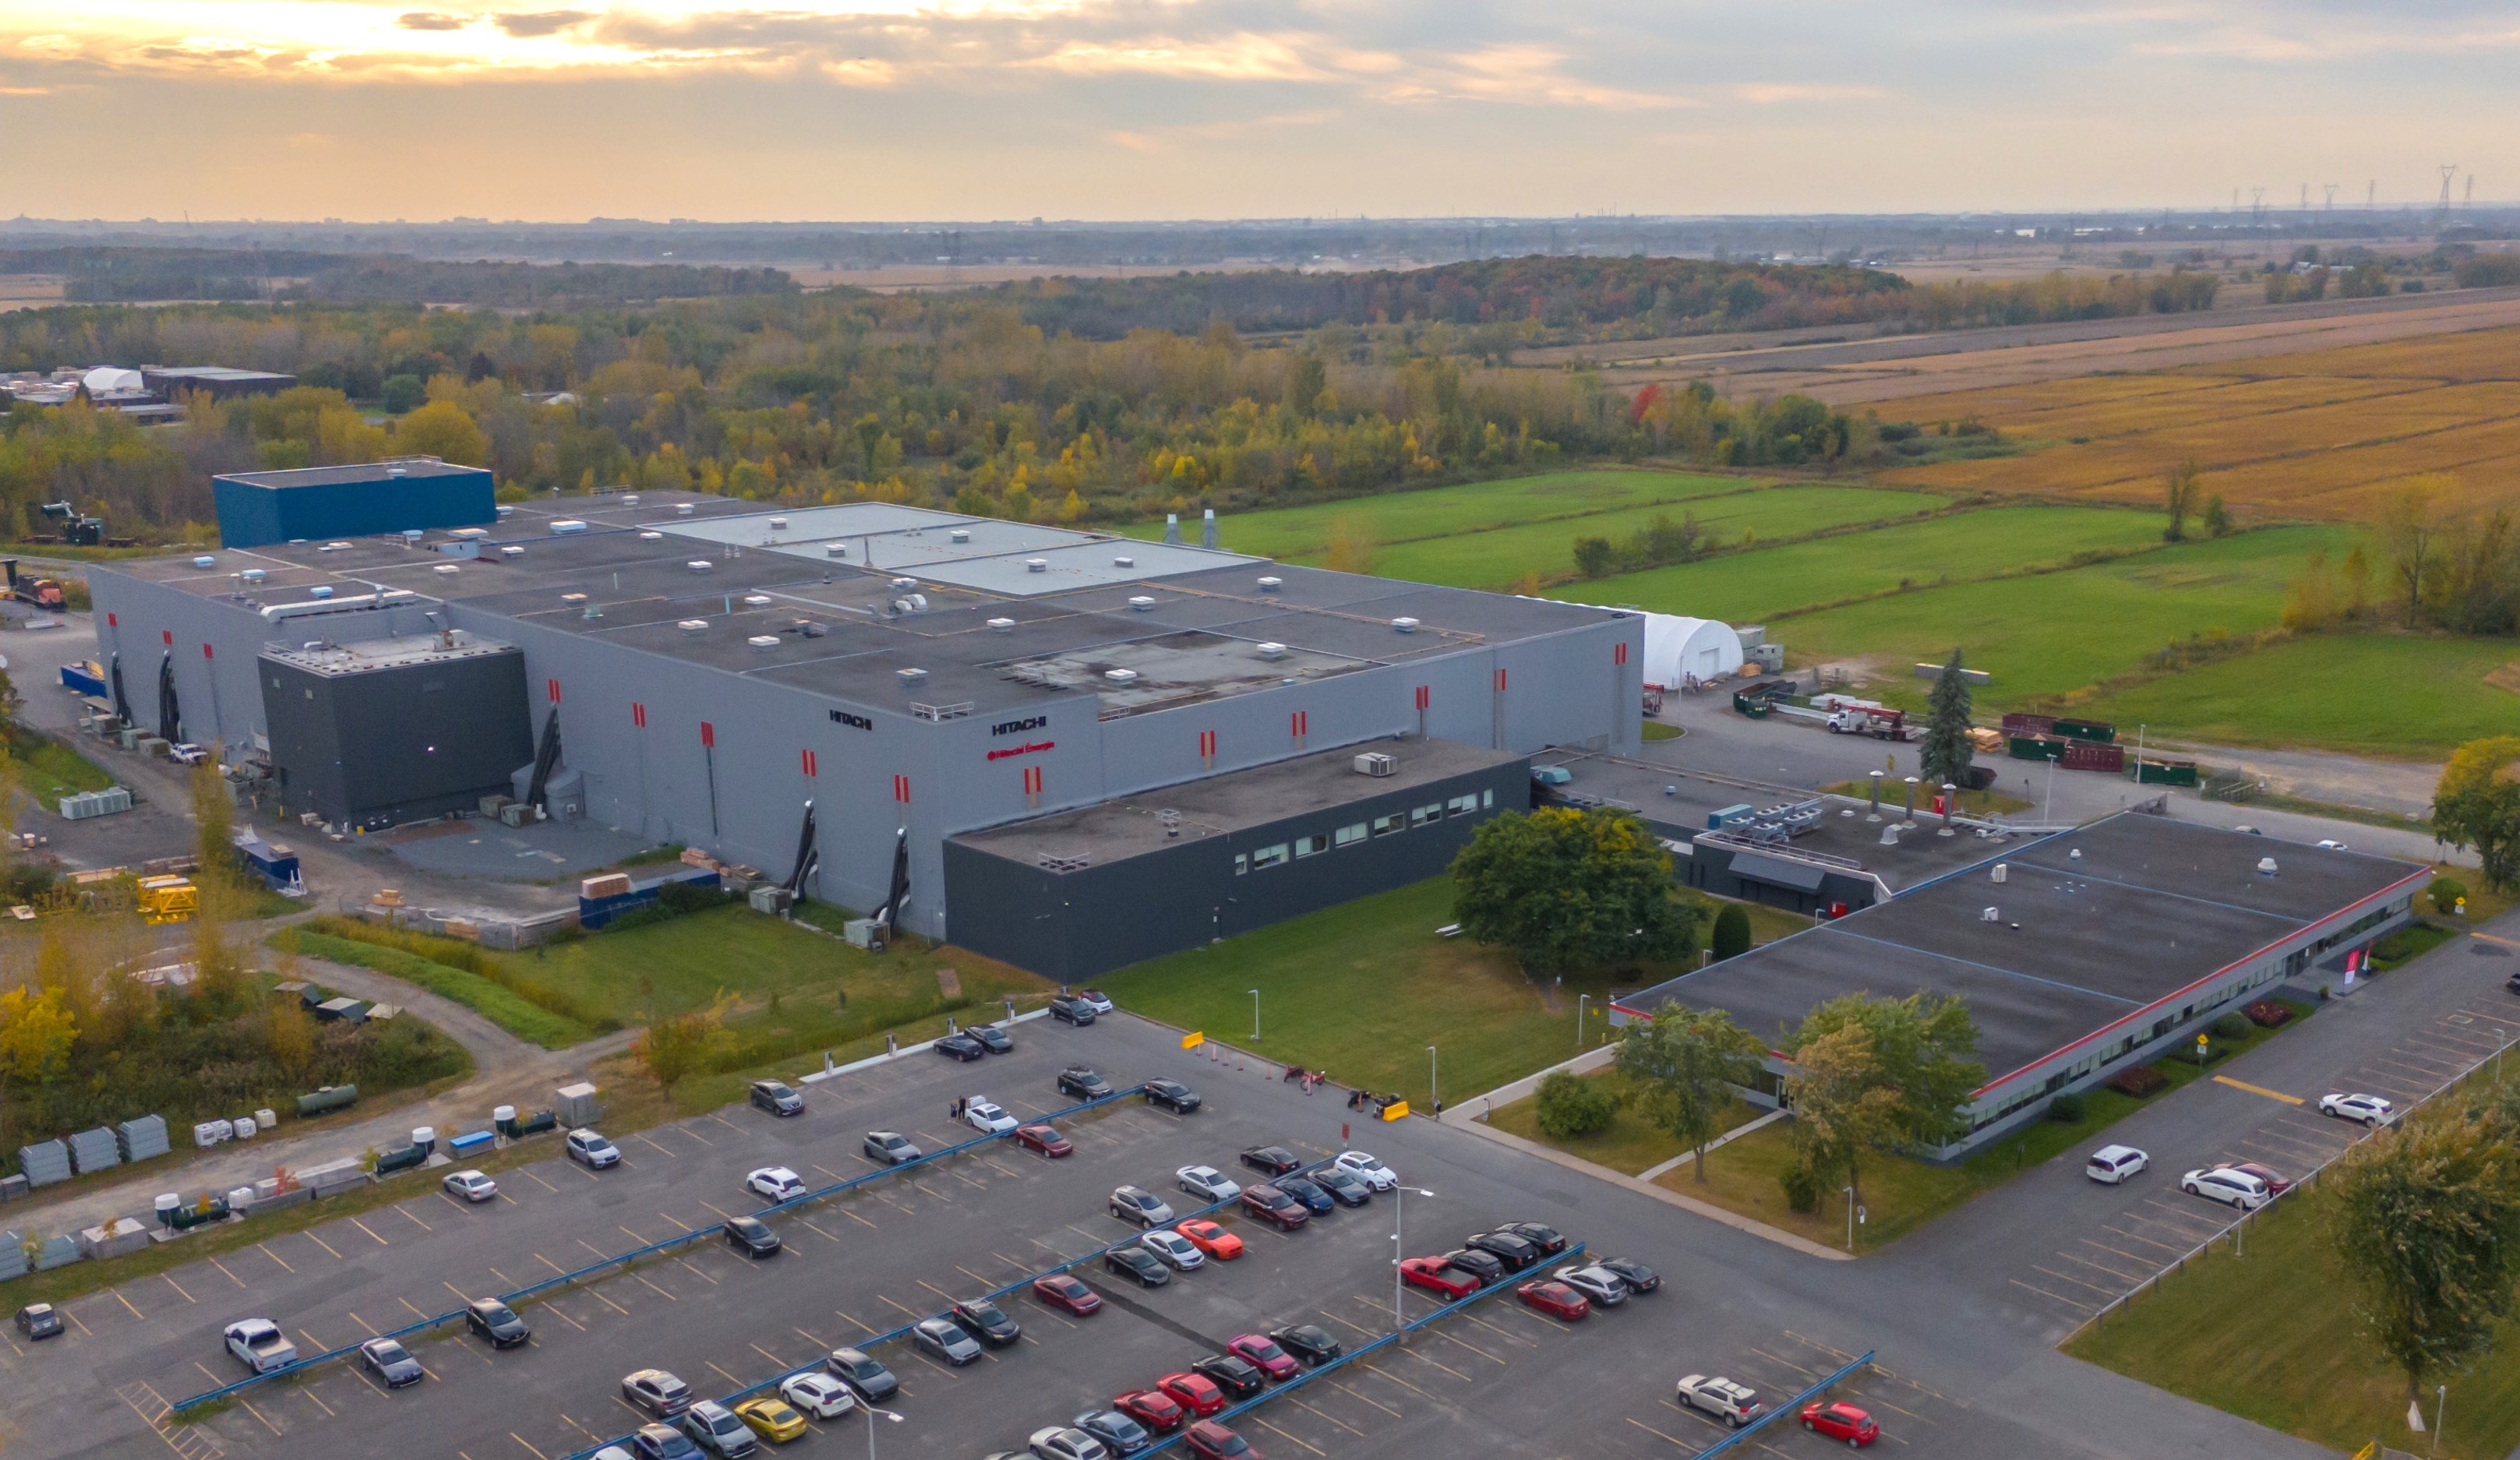 Hitachi Energy announces over 0 million in modernization and upgrade of power transformer factory and facilities in Quebec, Canada